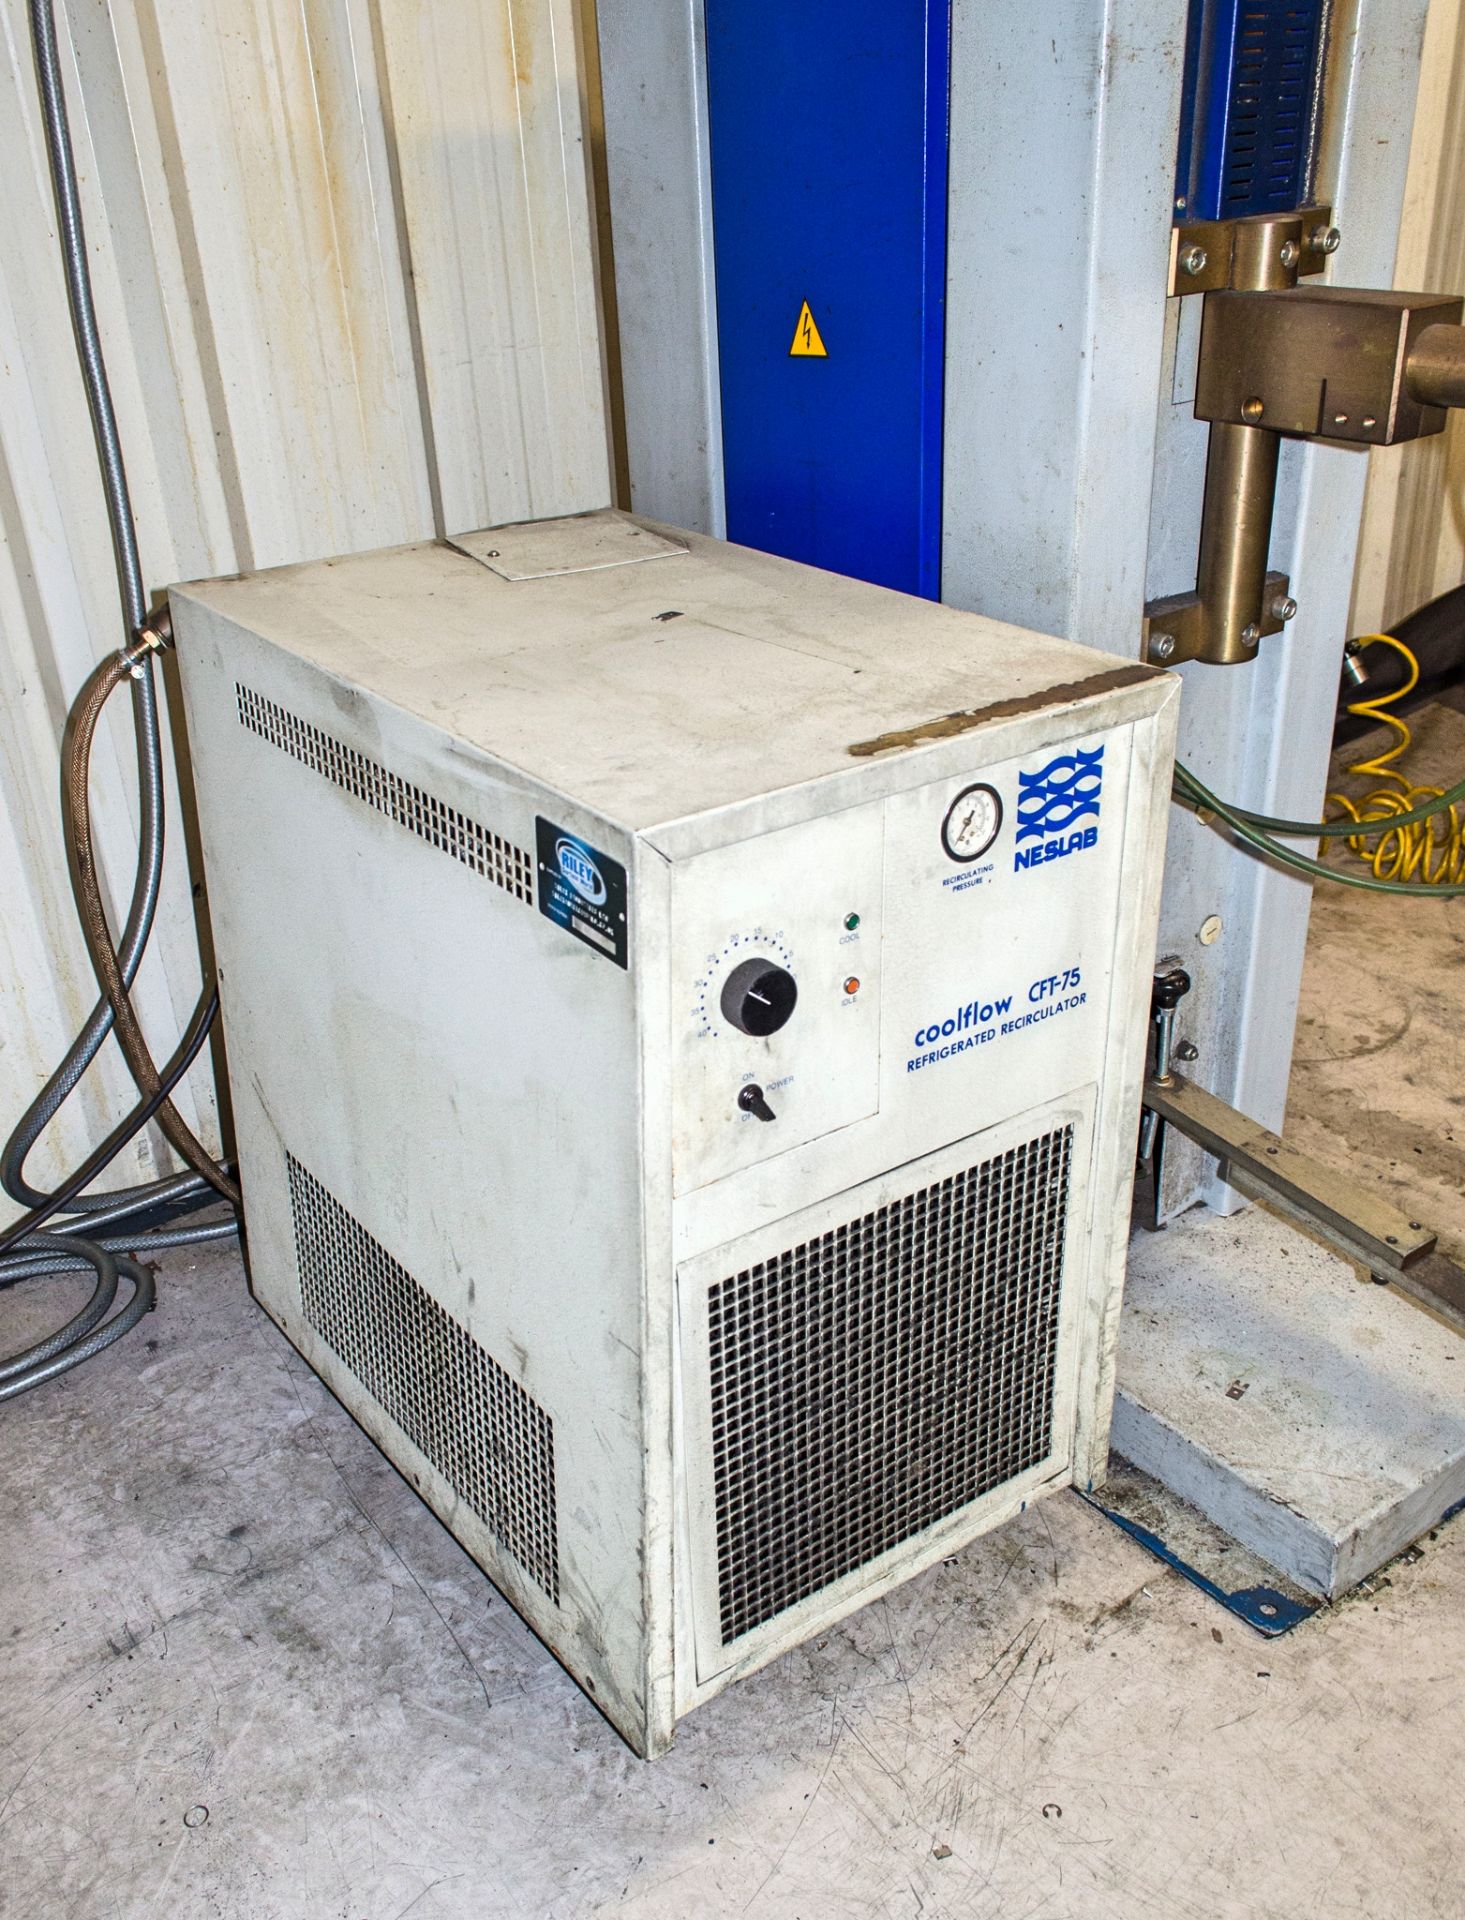 PEI PB126.C2 25kva spot welder Year: 2005 S/N: D503128 c/w Neslab Coolflow CFT-75 chiller - Image 2 of 4